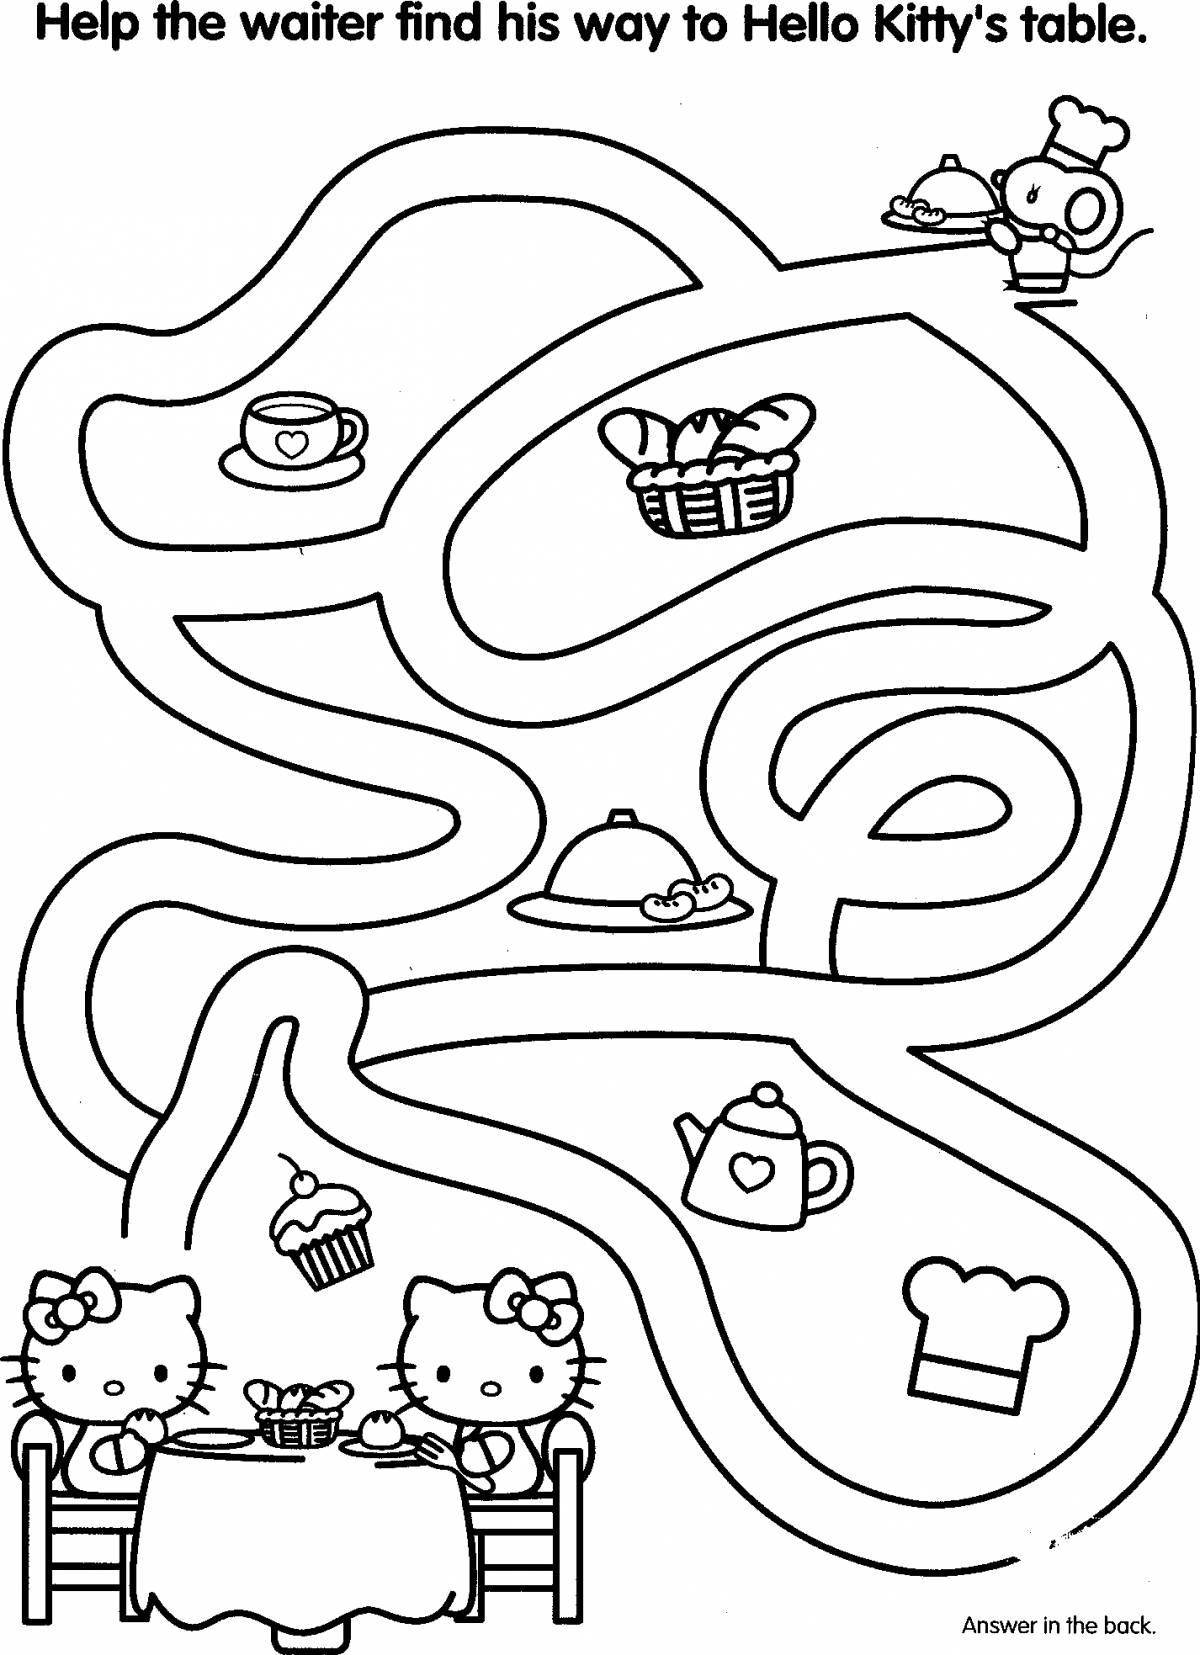 Mazes for children 4 5 years old #3